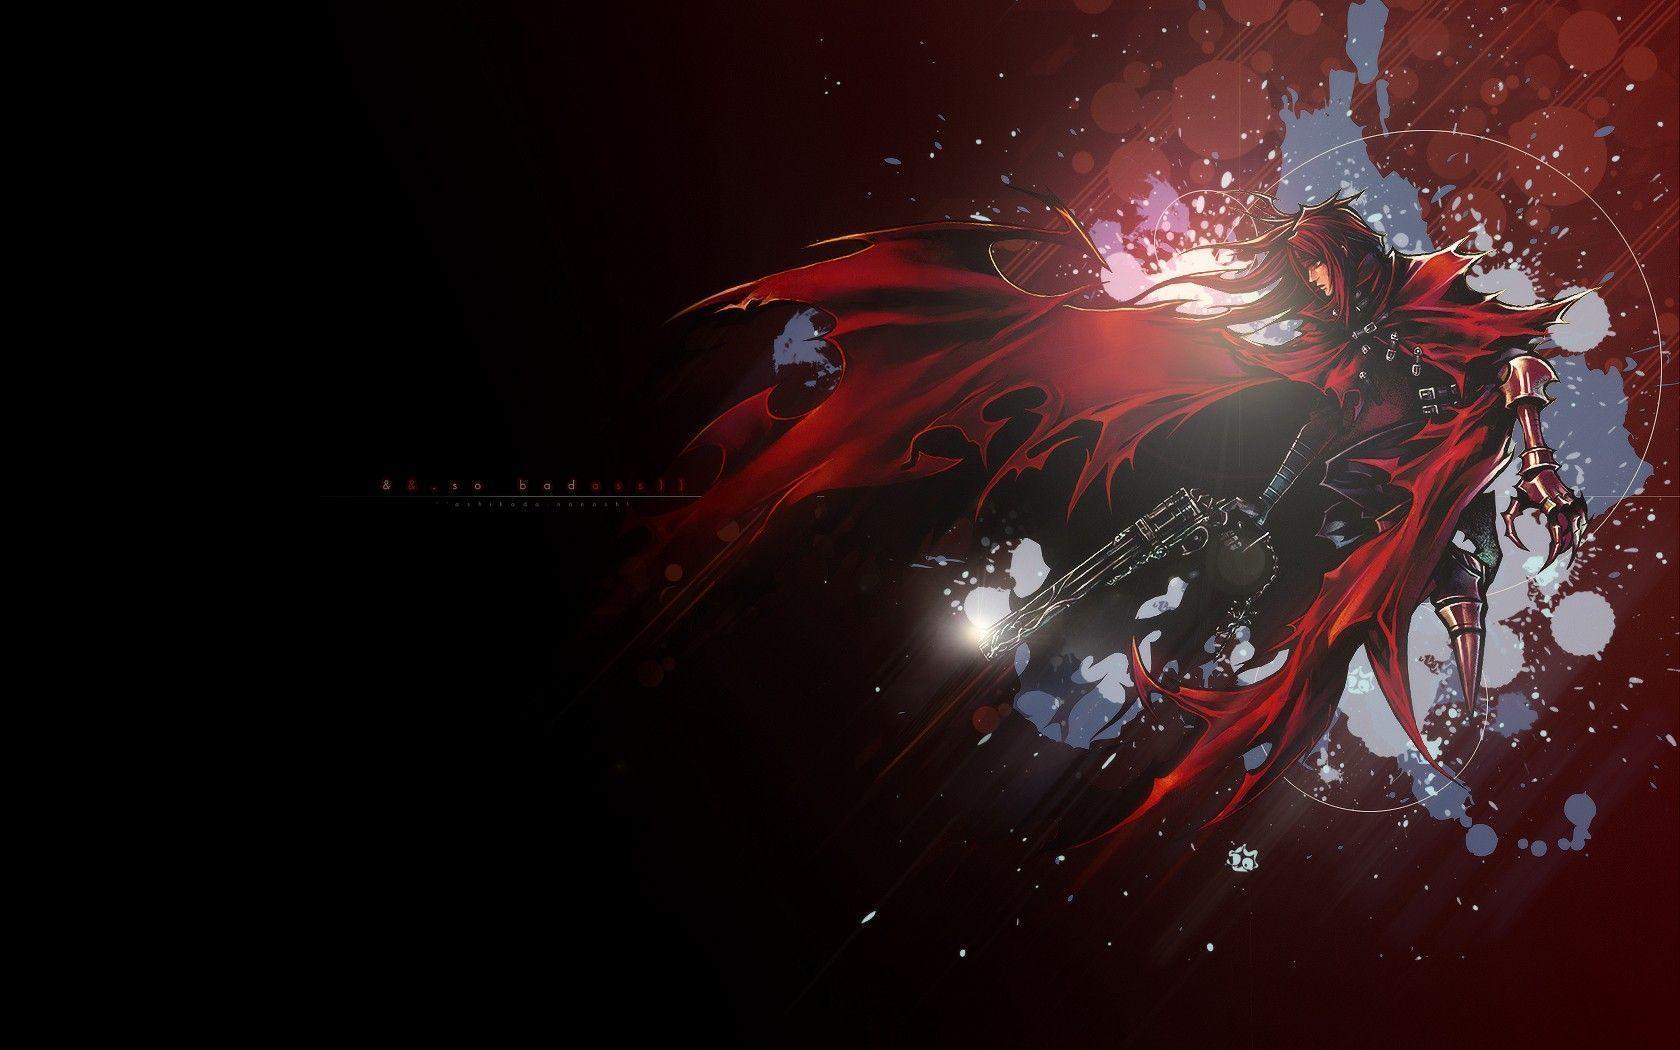 Free Download Image Final Fantasy Vii Anime HD Wallpaper Car Picture